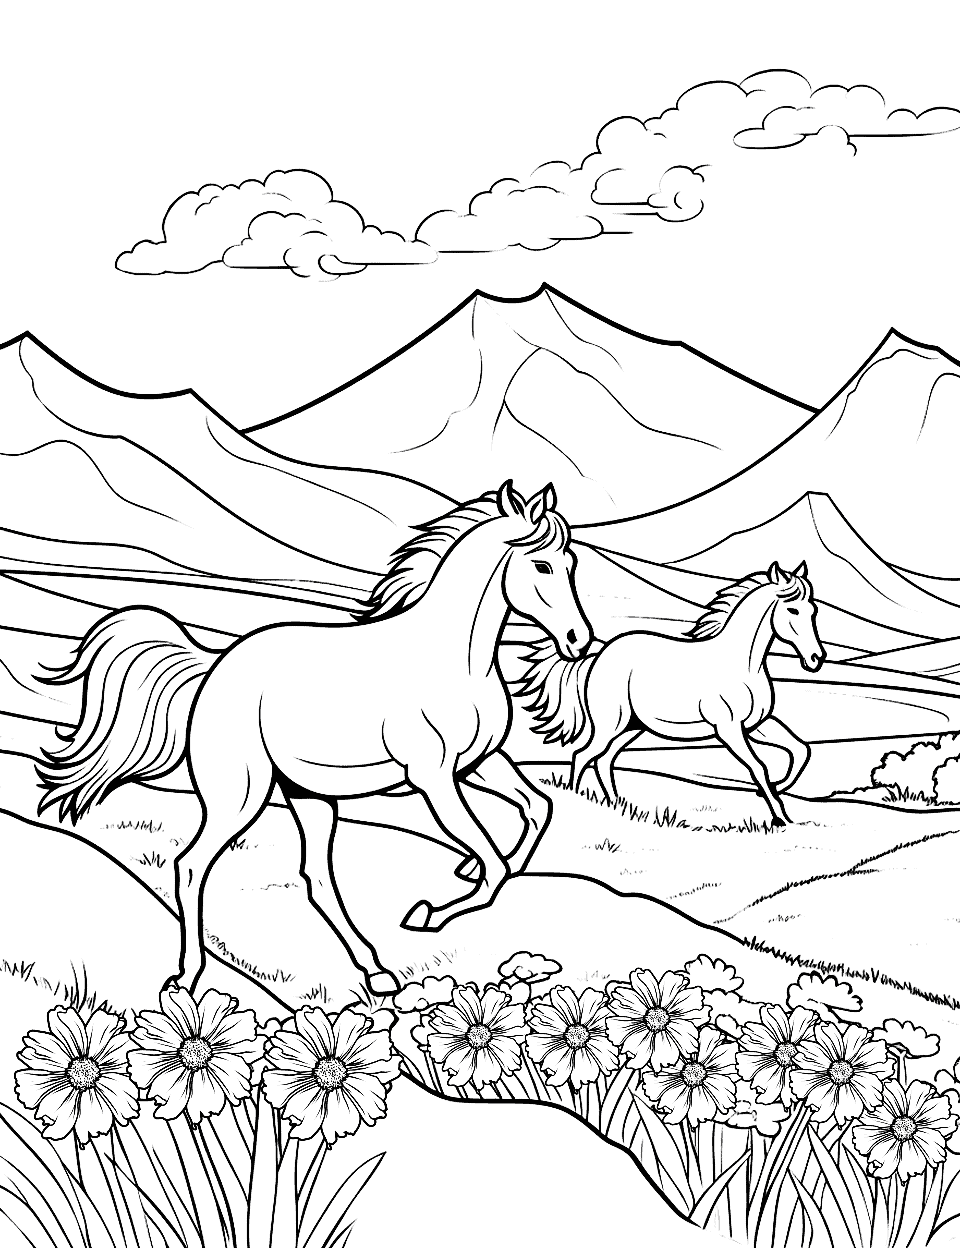 Wild Horses Running Free Coloring Page - Wild horses running across a field with mountains in the distance.